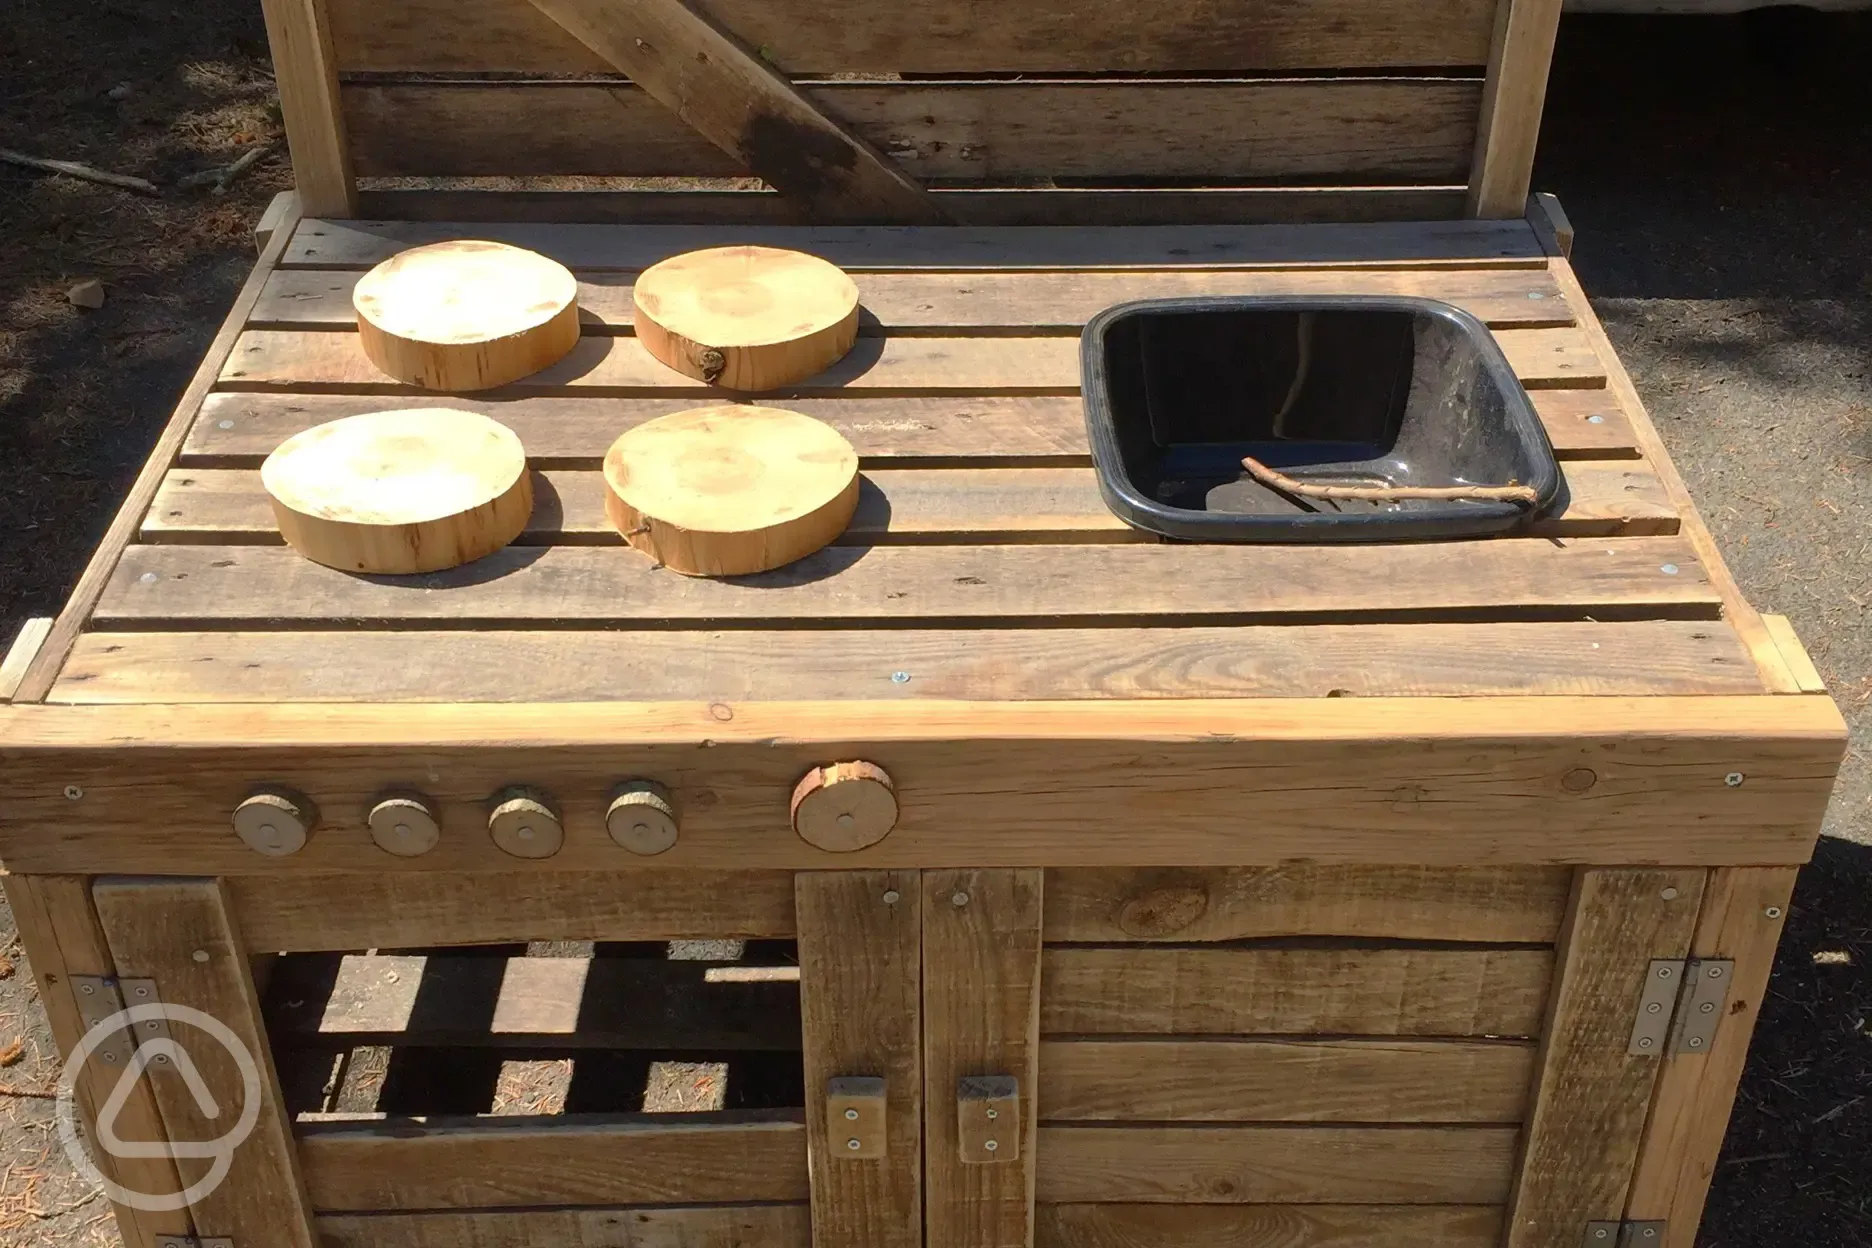 Mud kitchen for the budding chefs!